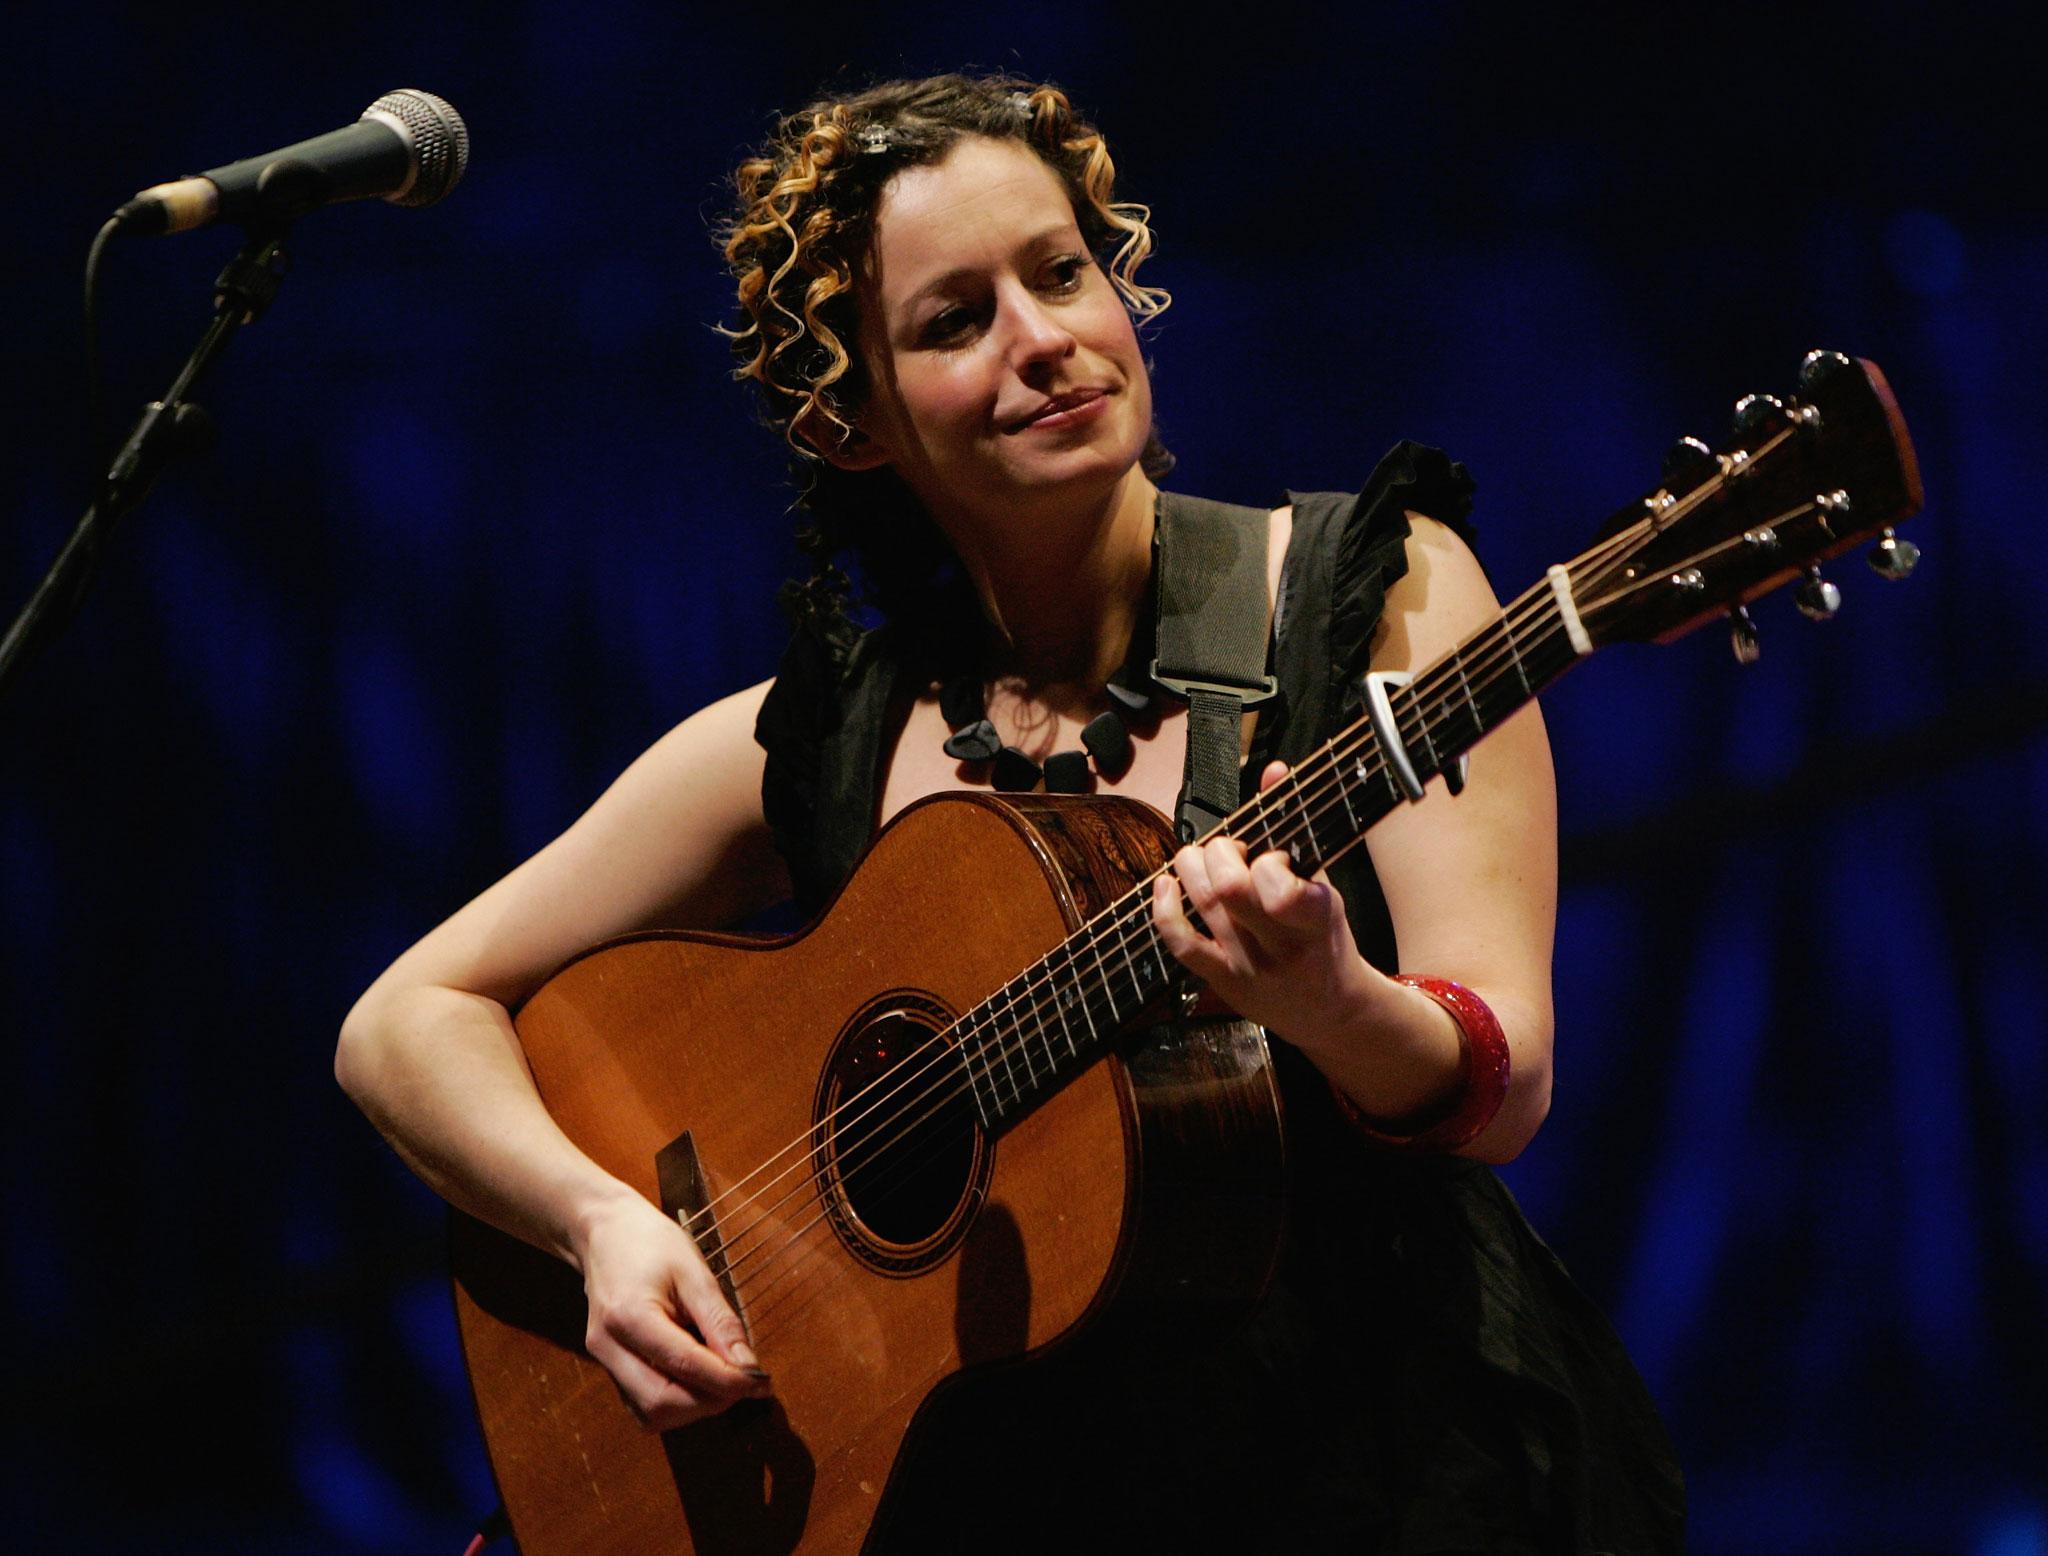 Kate Rusby is one of English folk music's biggest stars